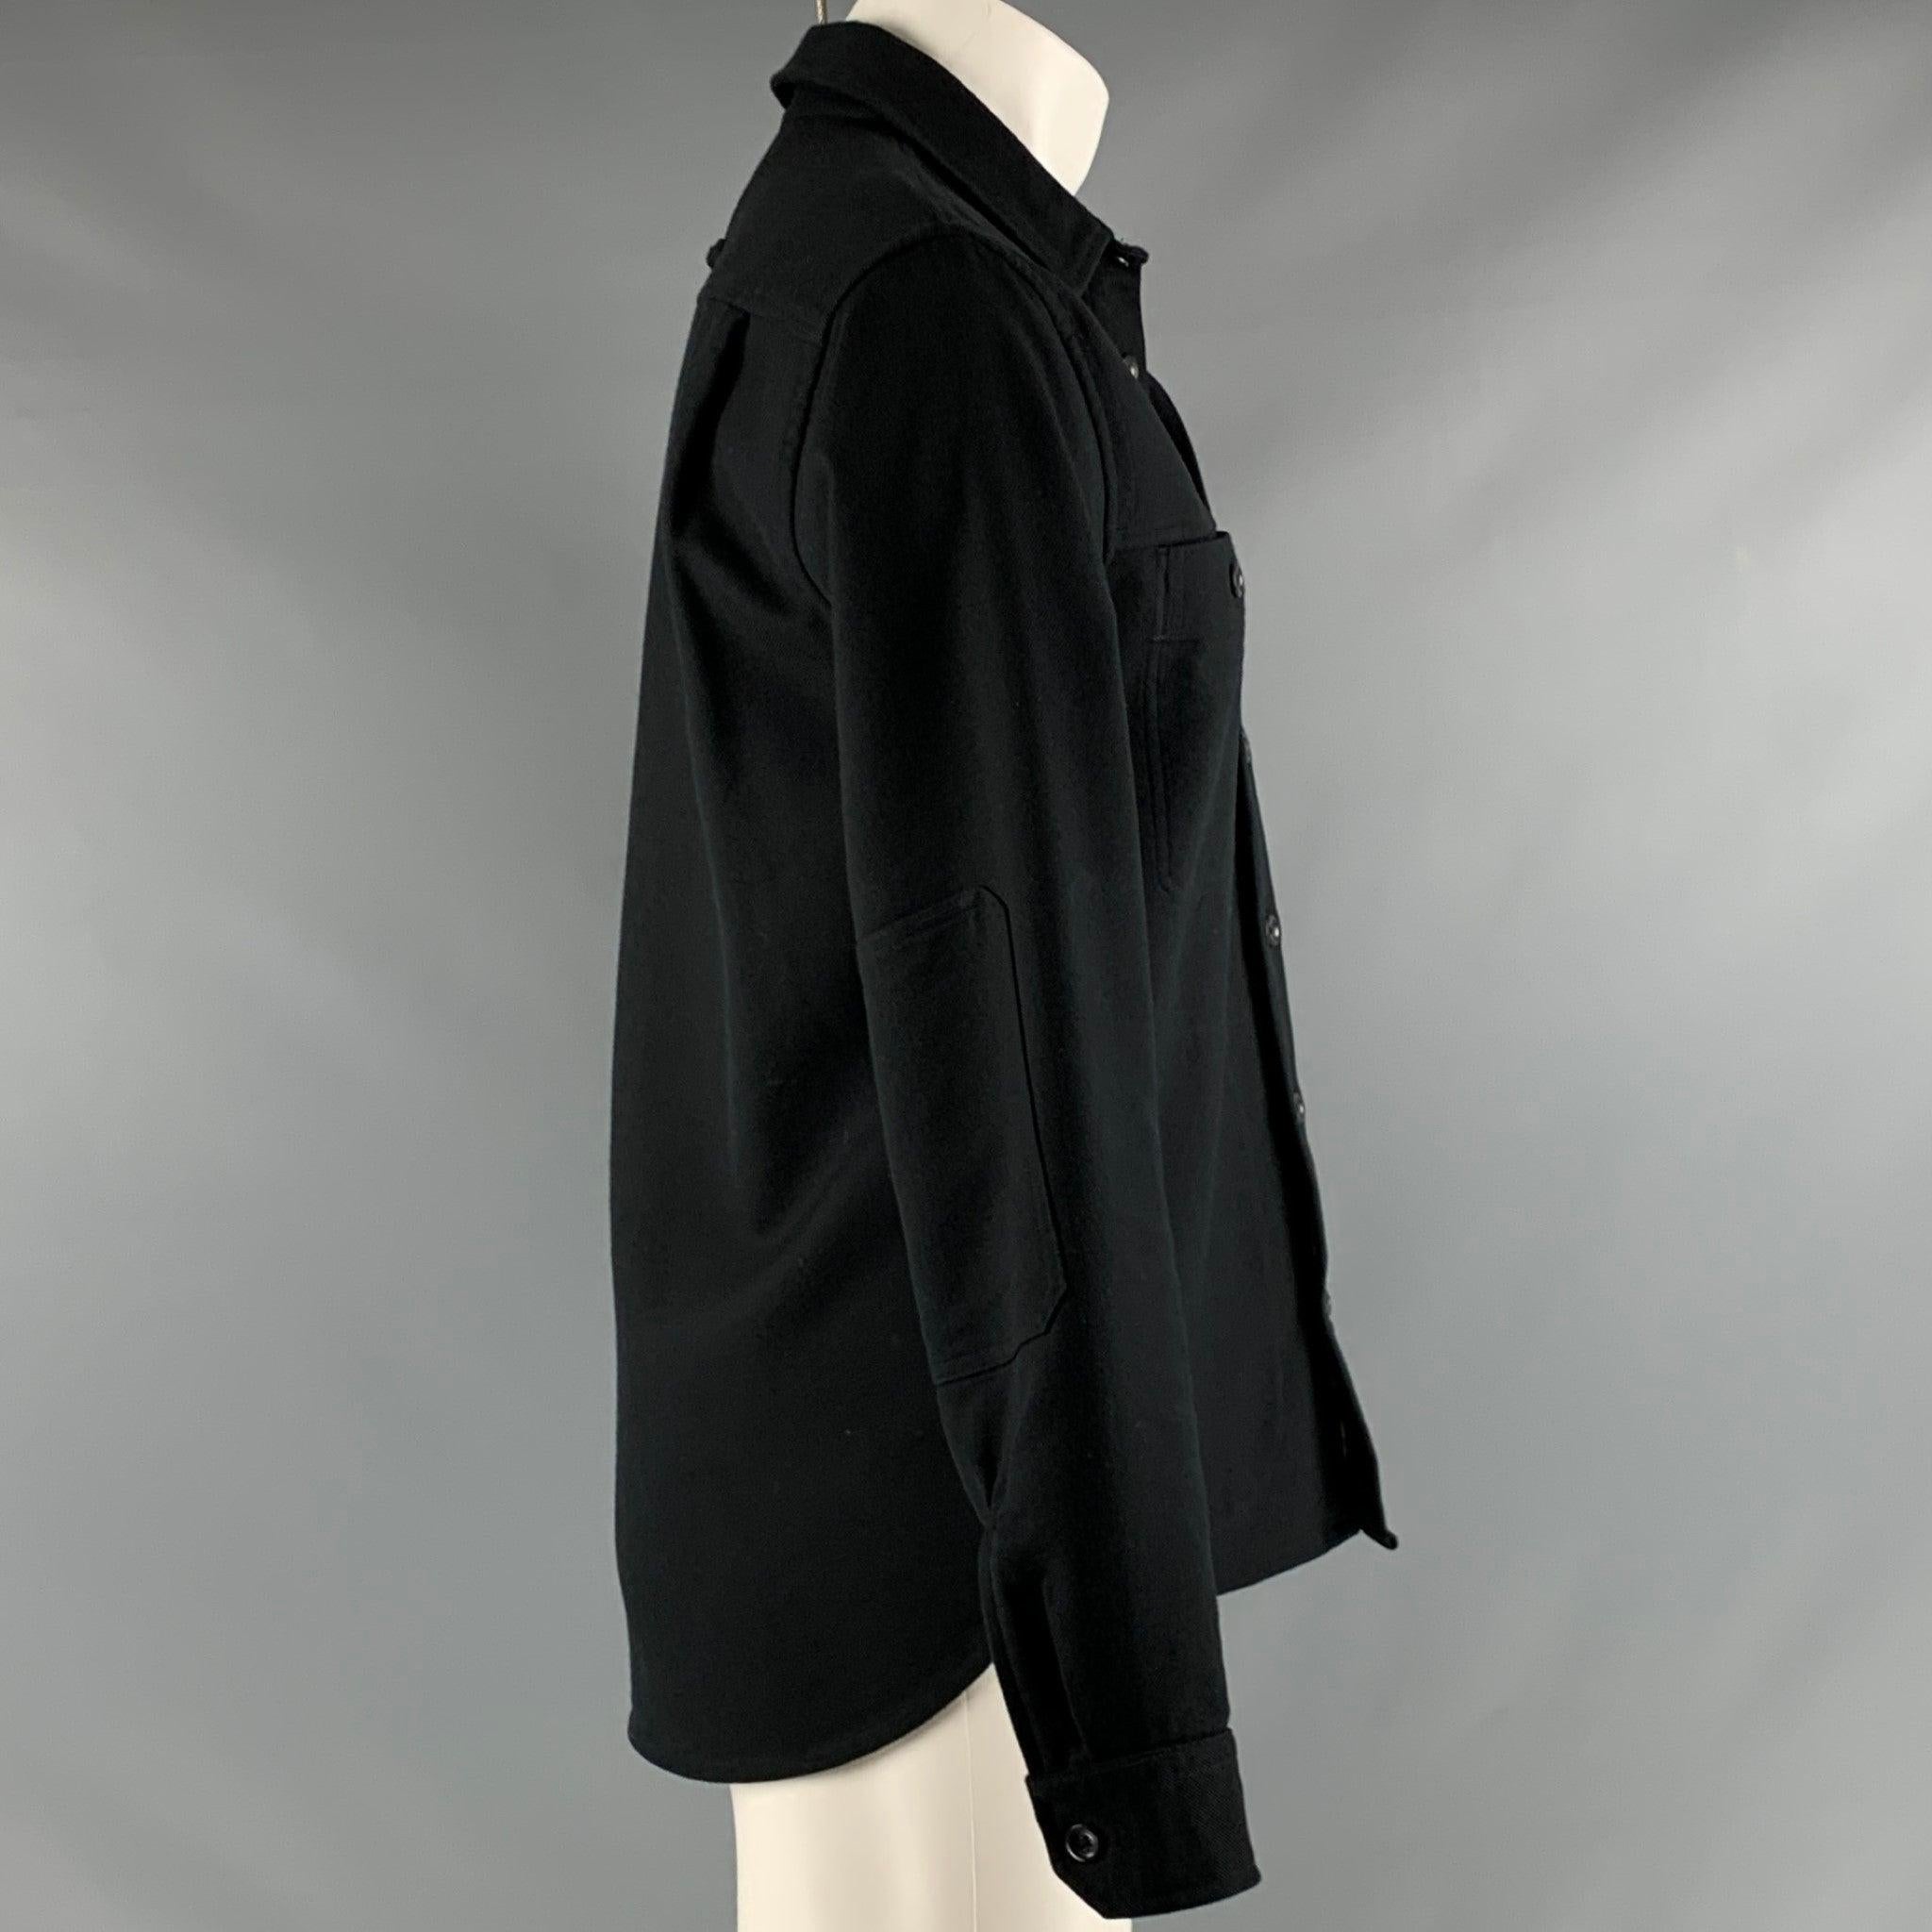 VINCE jacket
in a black cotton blend fabric featuring subtle black elbow patches, four pockets, and a button closure. Excellent Pre-Owned Condition. 

Marked:   S 

Measurements: 
 
Shoulder: 18 inches Chest: 38 inches Sleeve: 24.5 inches Length: 28